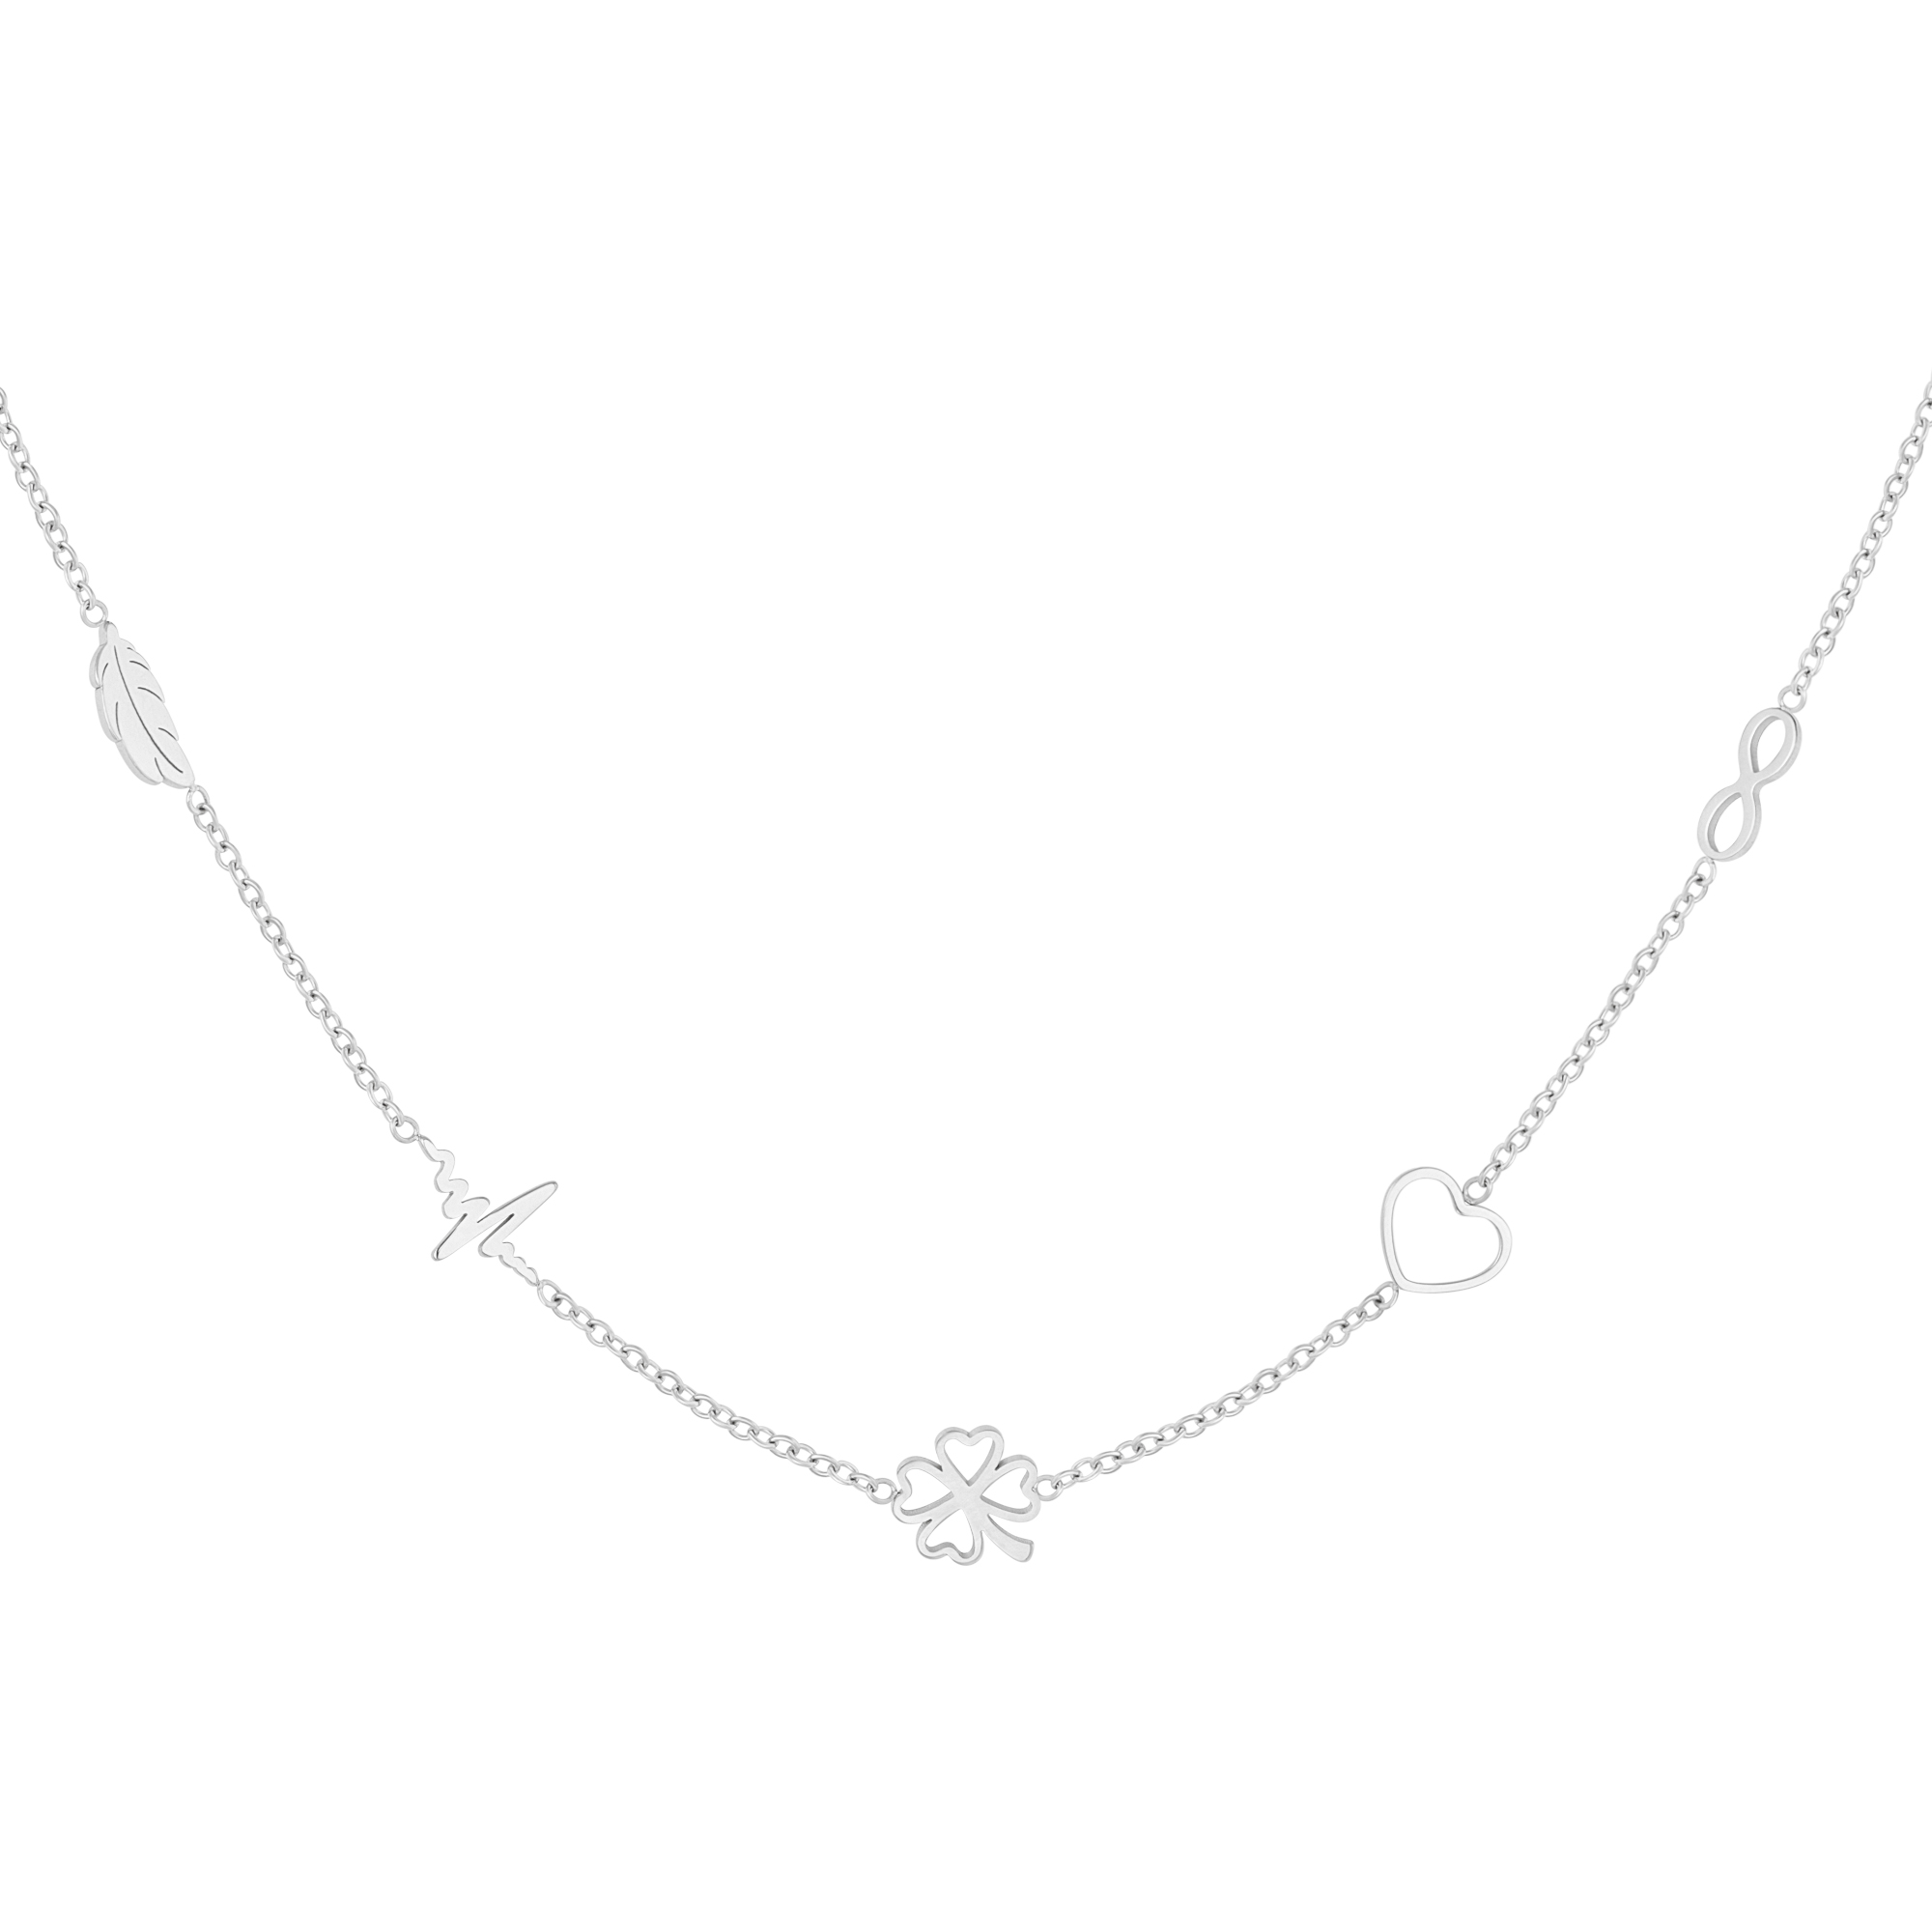 Minimalist necklace with charms